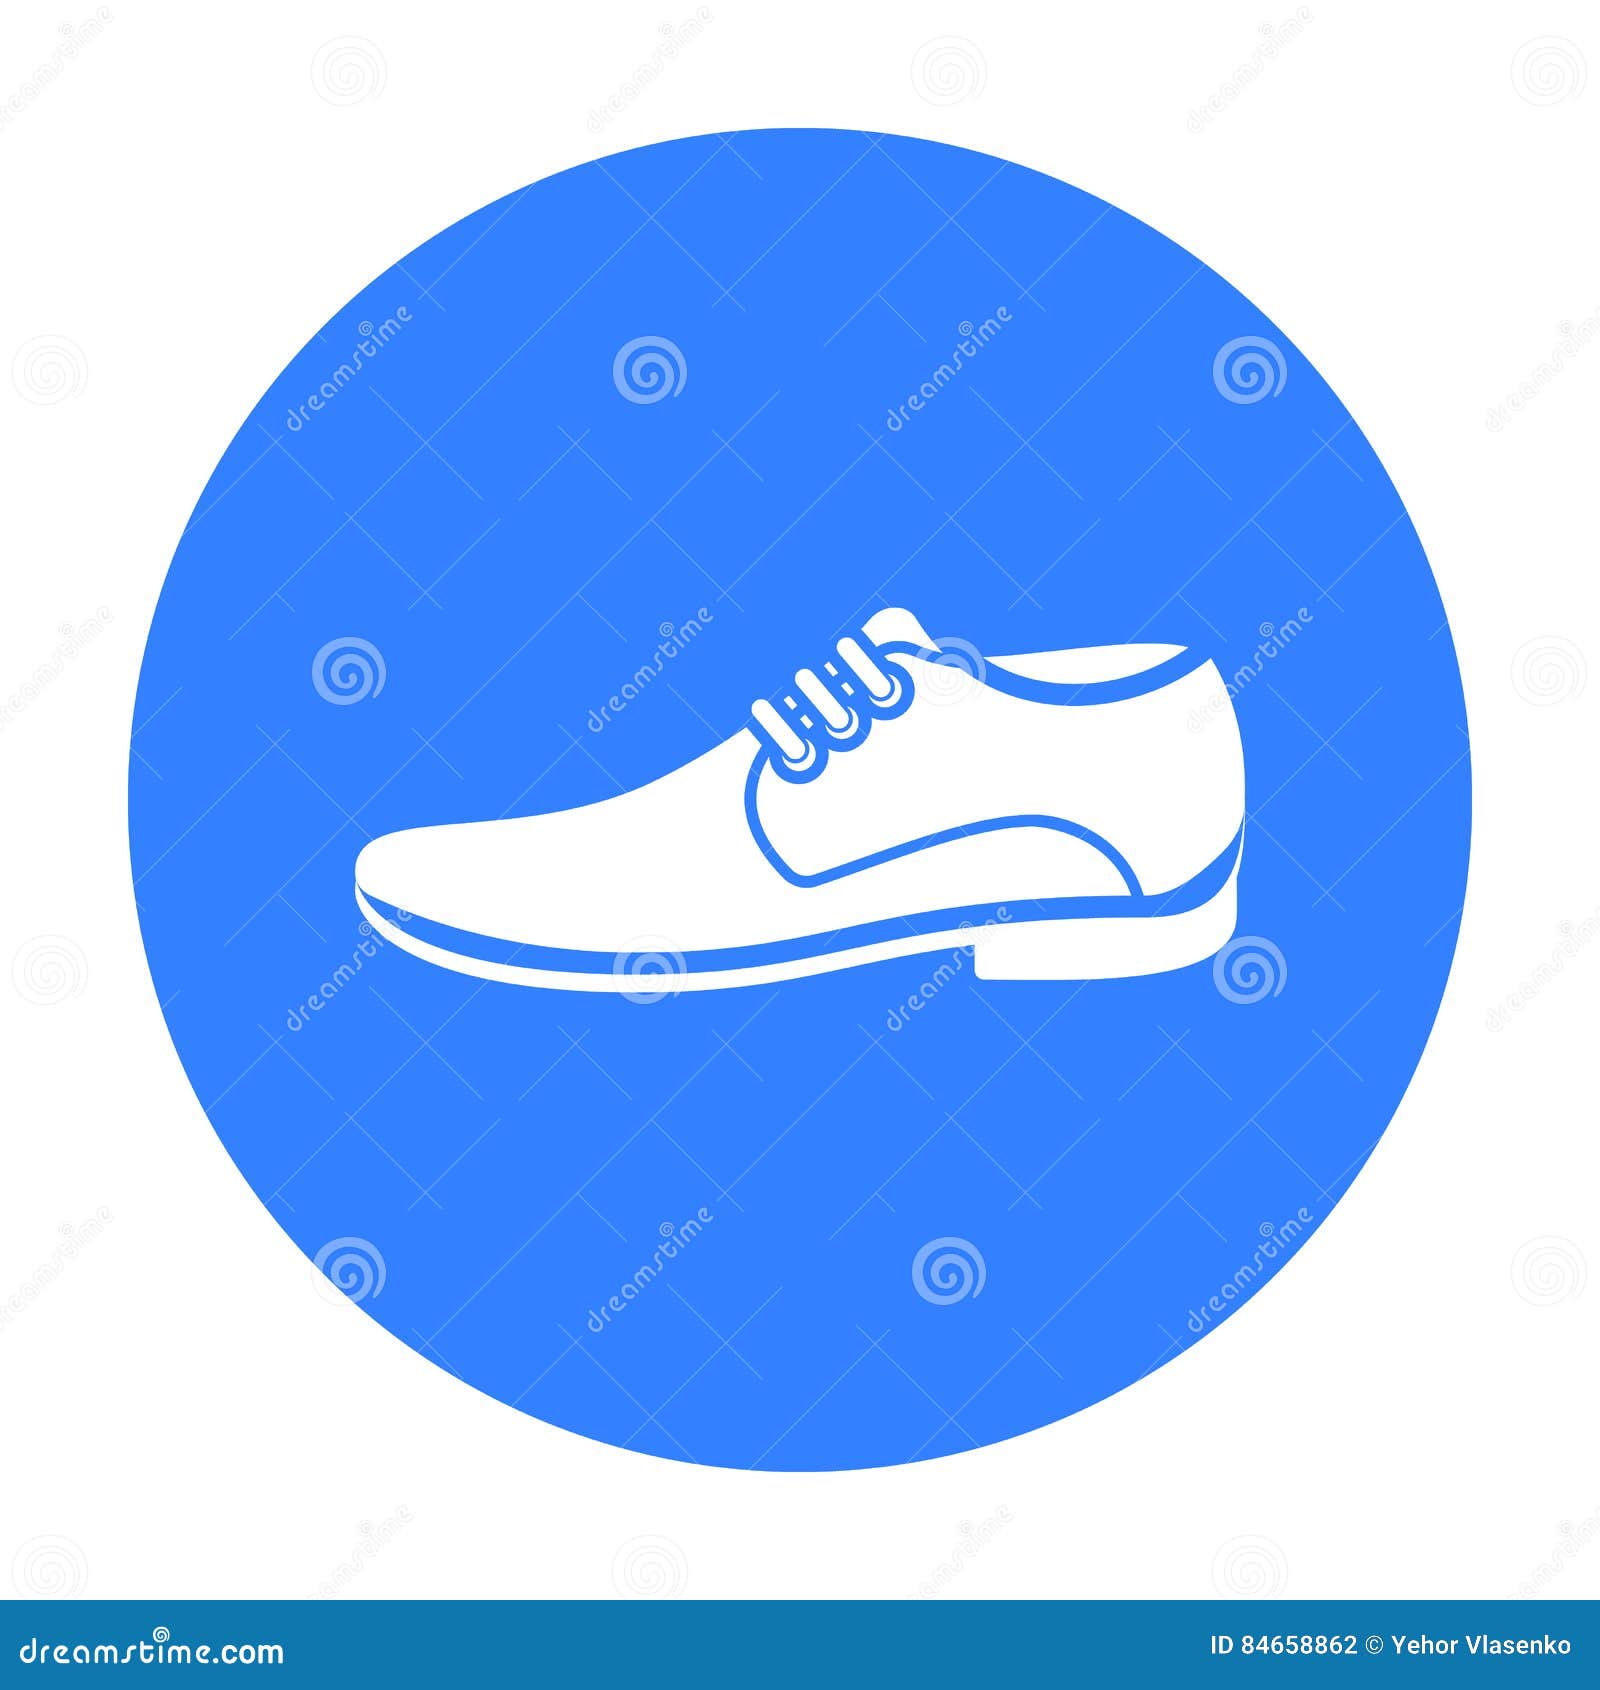 Men Shoes Icon of Vector Illustration for Web and Mobile Stock Vector ...